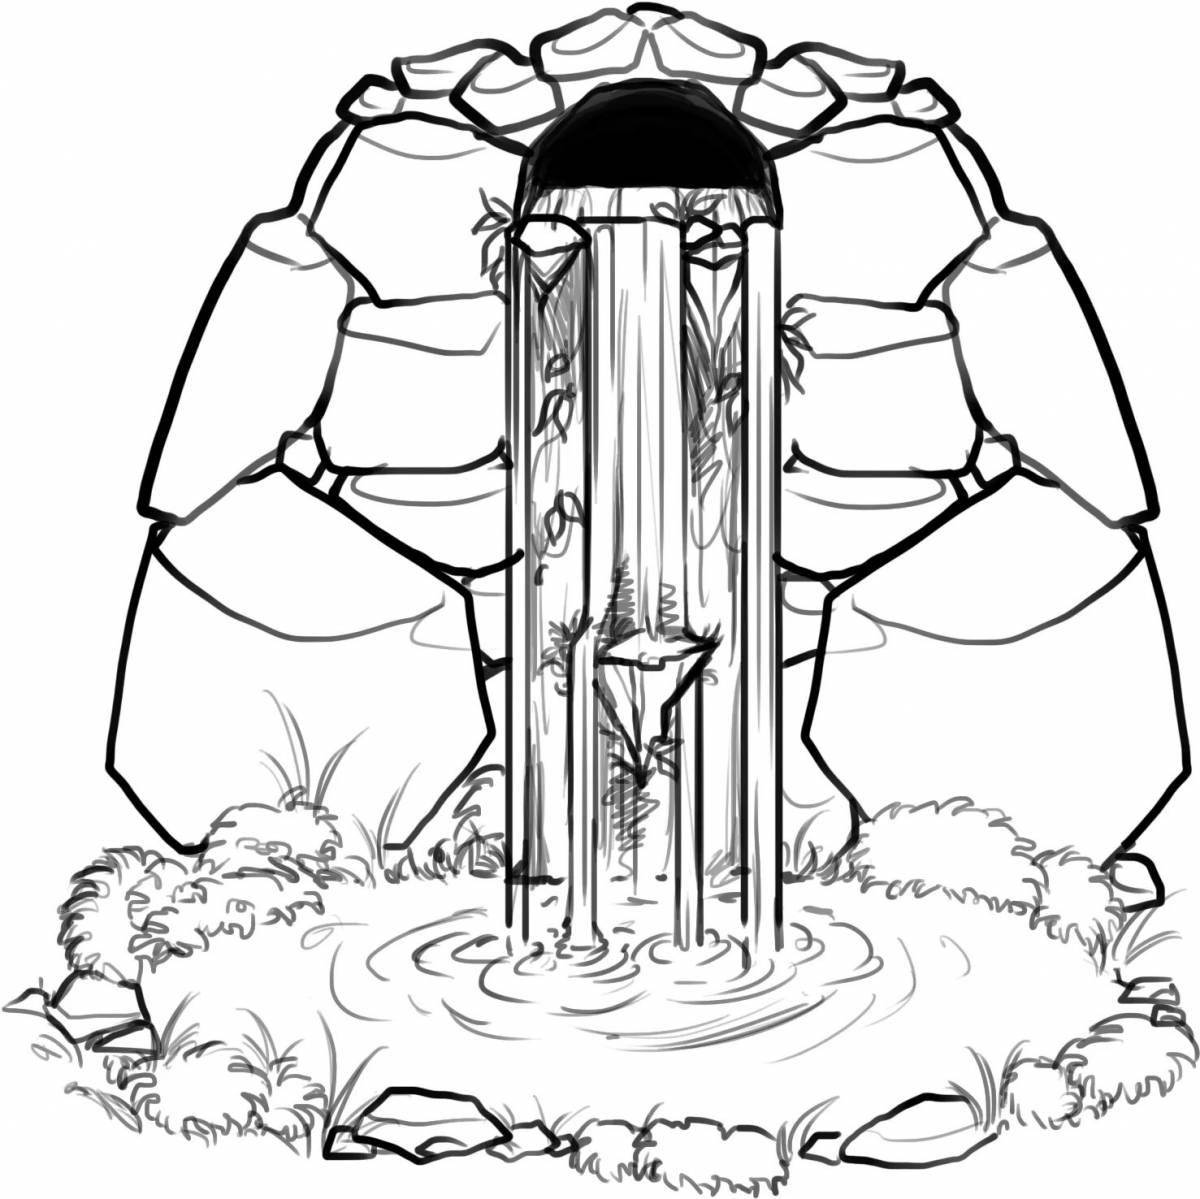 Painting waterfall coloring page for kids